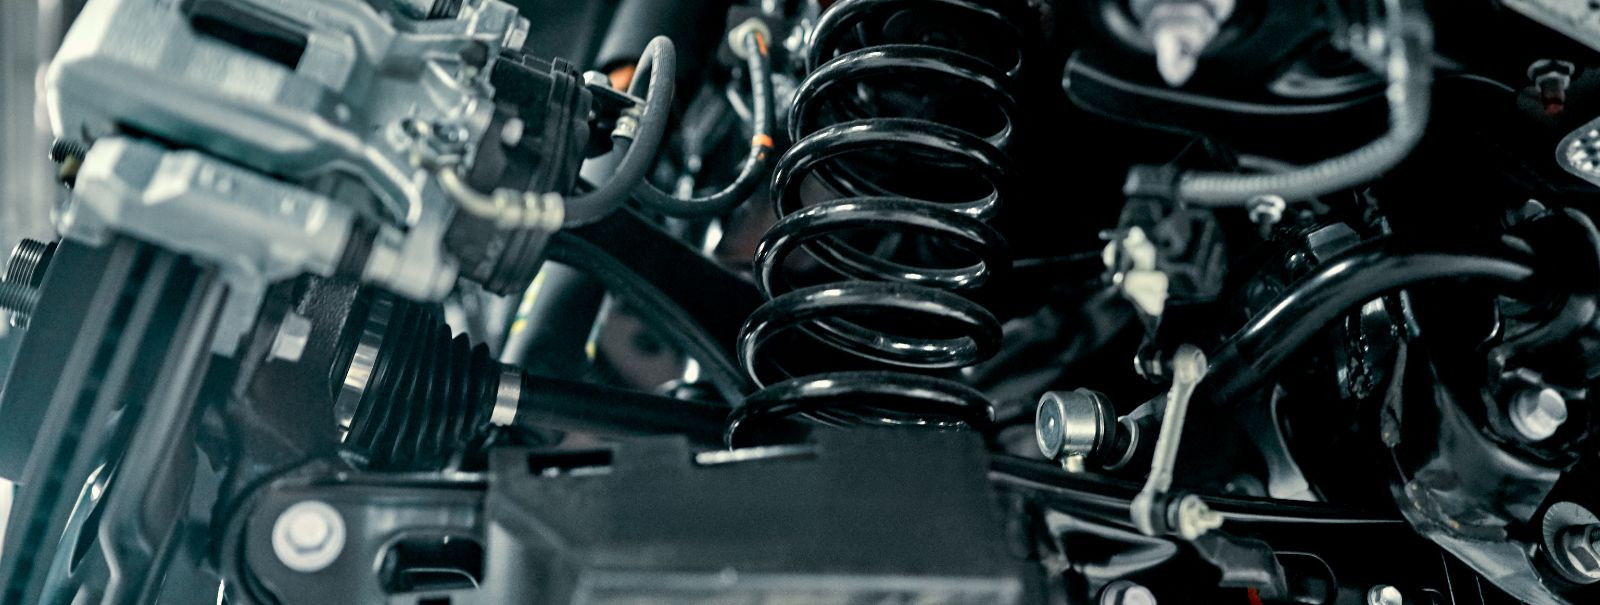 The suspension system of a vehicle is a complex network of components that includes springs, shock absorbers, struts, control arms, and ball joints, among other